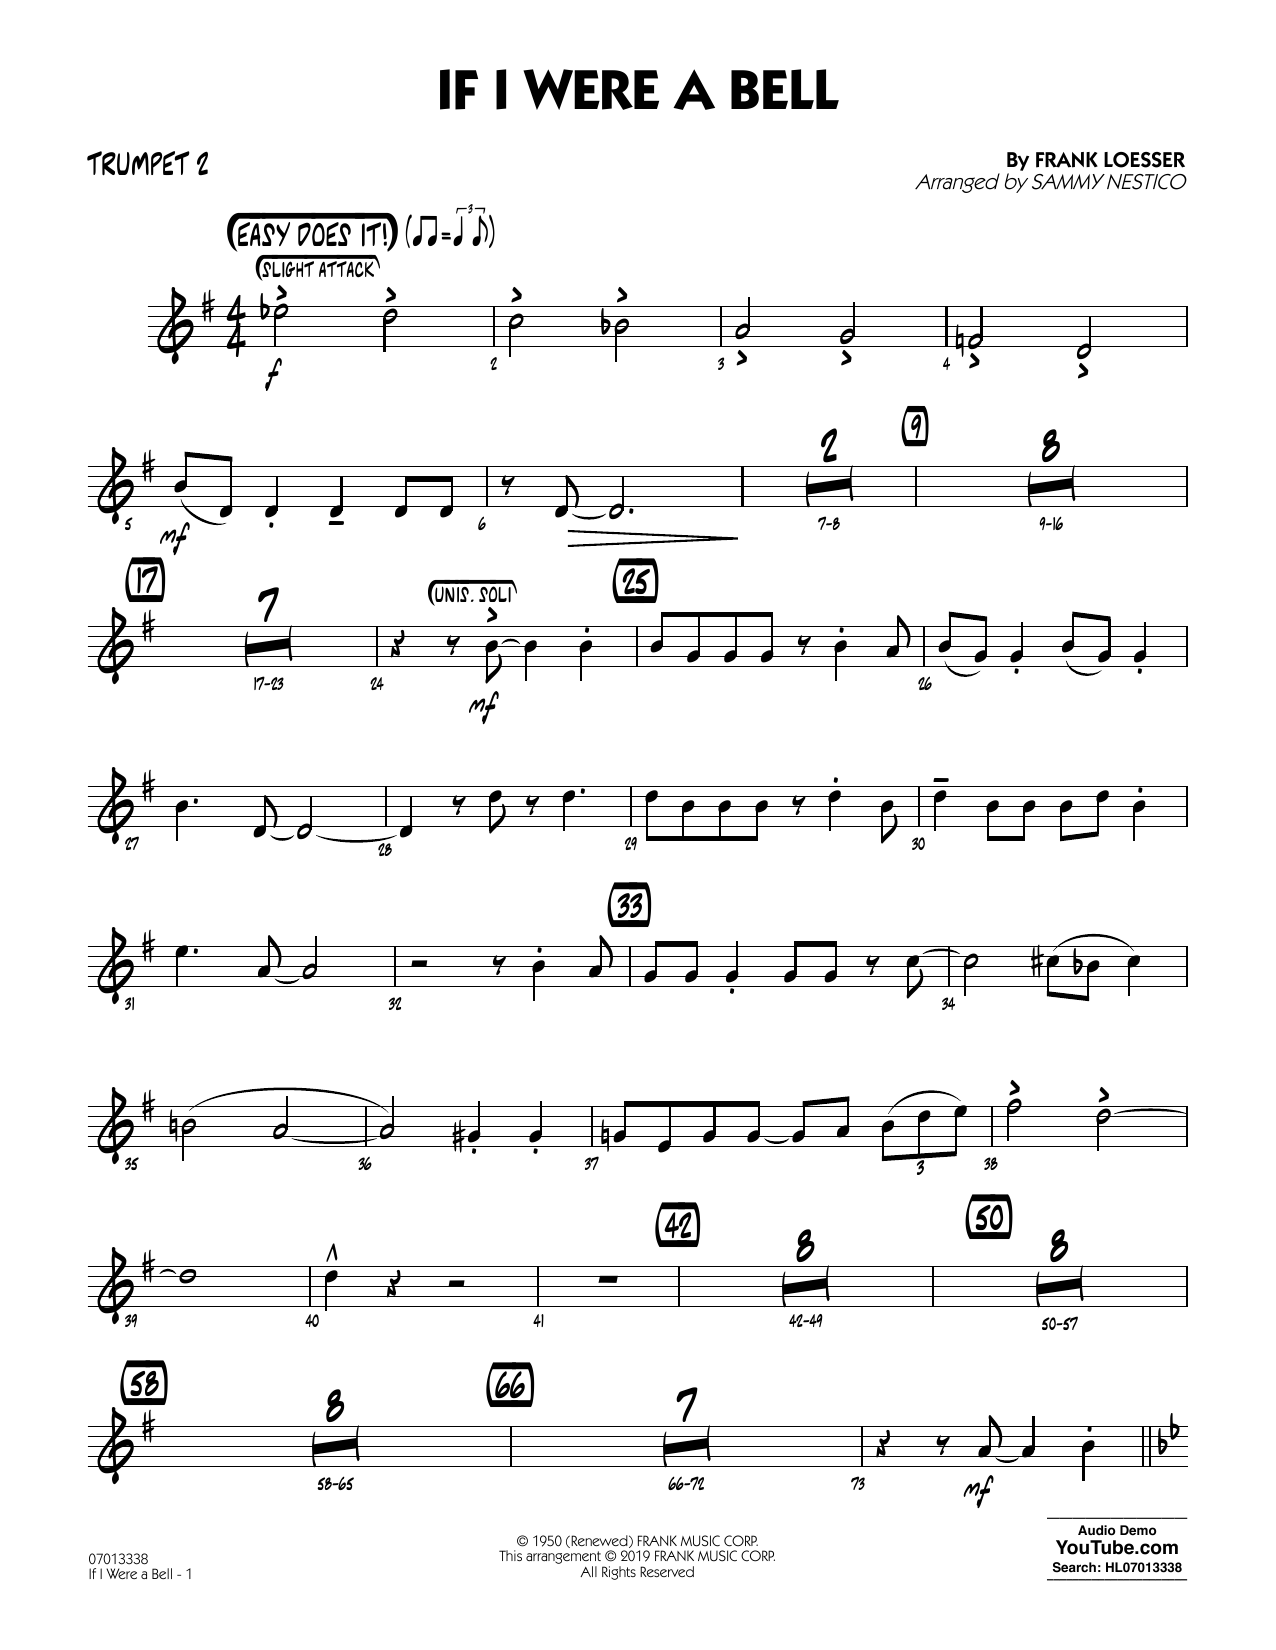 Frank Loesser If I Were a Bell (arr. Sammy Nestico) - Trumpet 2 sheet music preview music notes and score for Jazz Ensemble including 2 page(s)